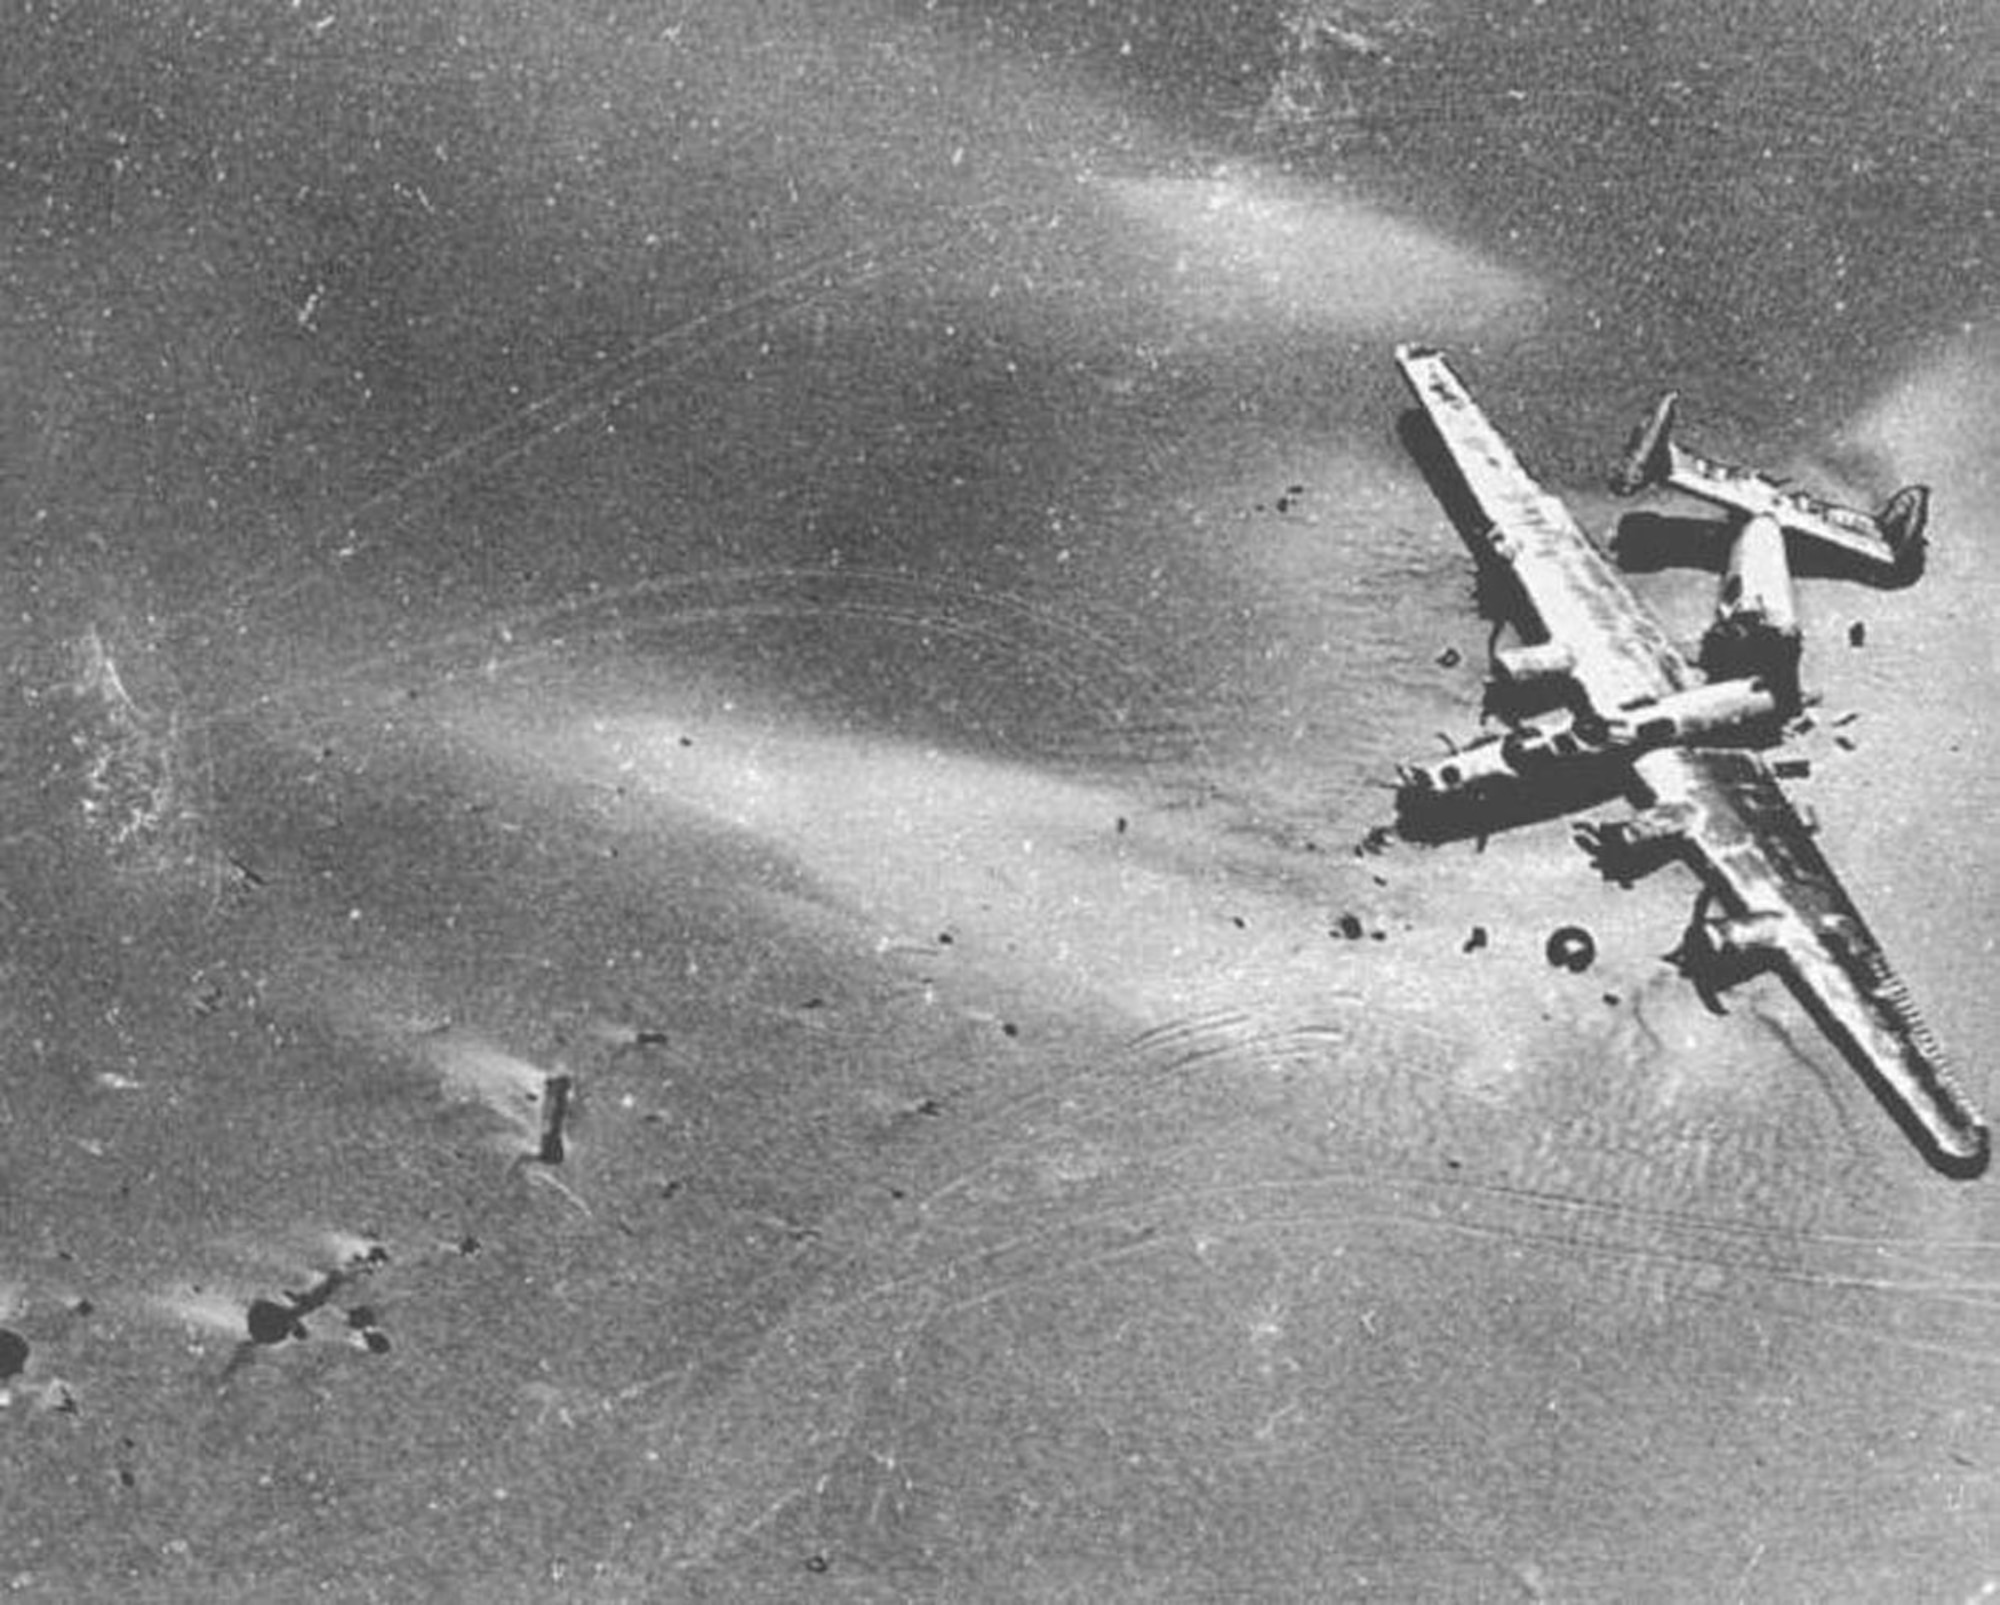 The Lady Be Good, while on its first mission, went missing in 1943 and was not found for more than 15 years. (U.S. Air Force photo)